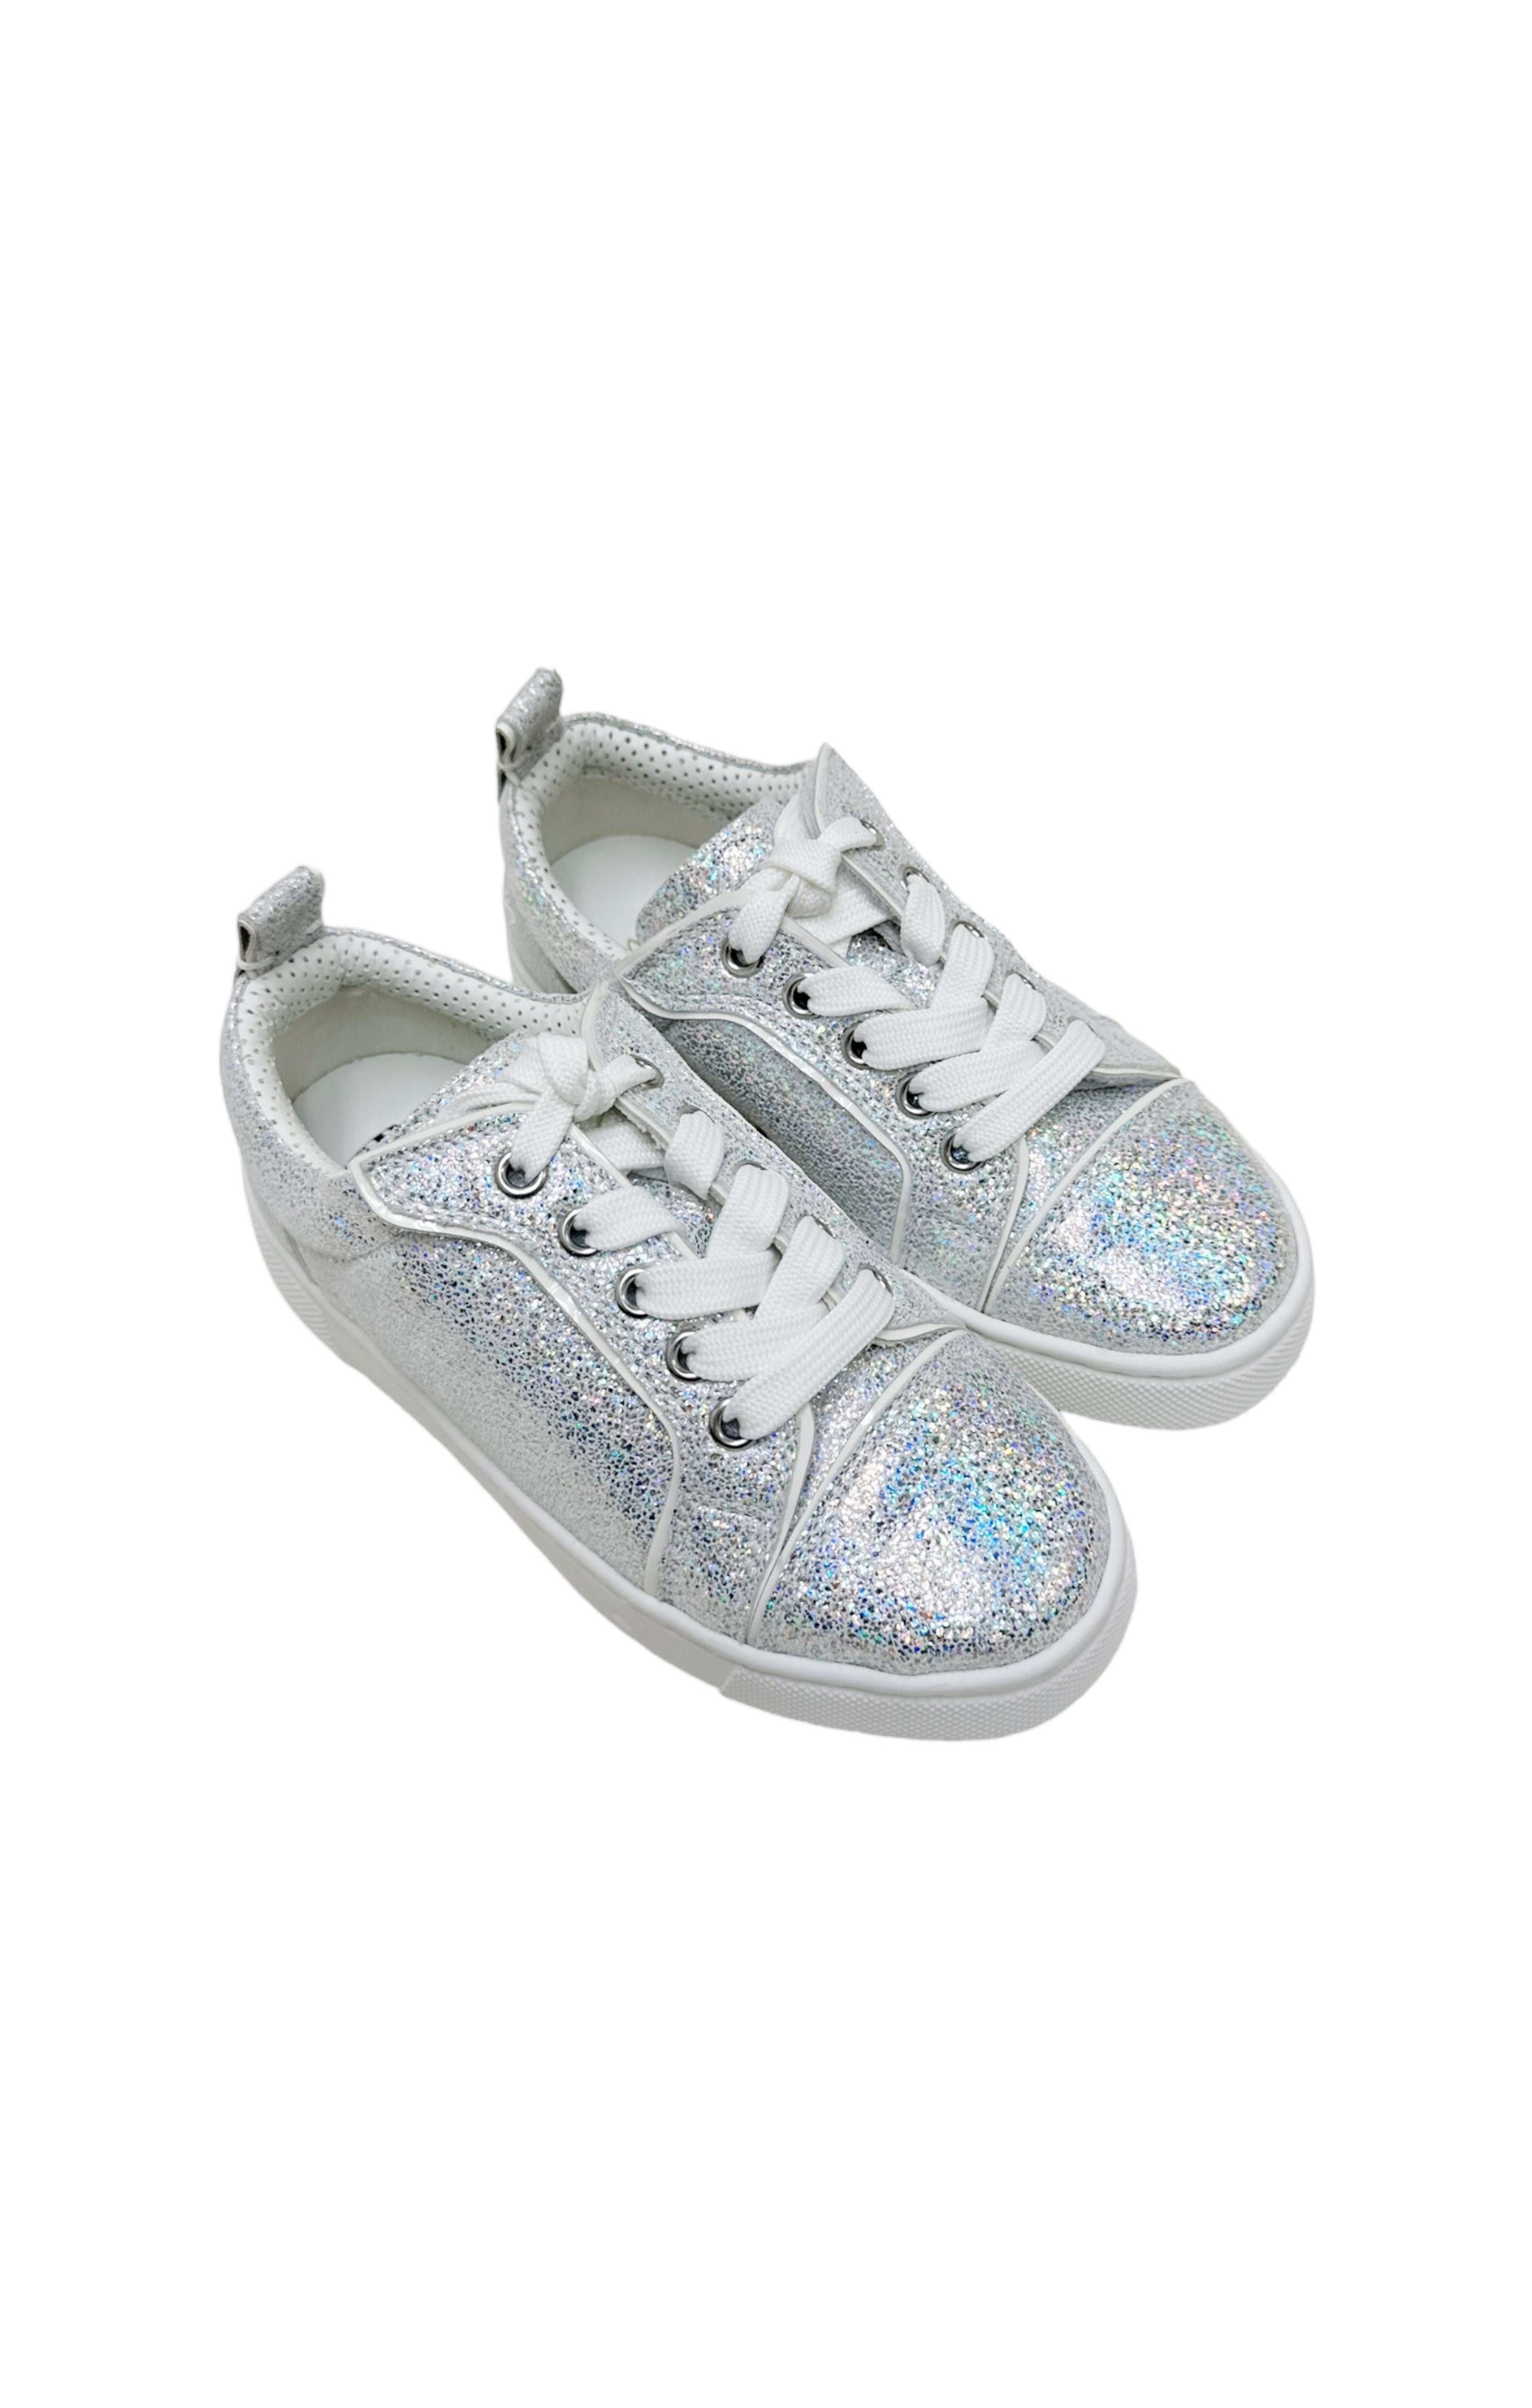 CHRISTIAN LOUBOUTIN (NEW) Sneakers Size: EUR 28 / Fit like Toddler US 11